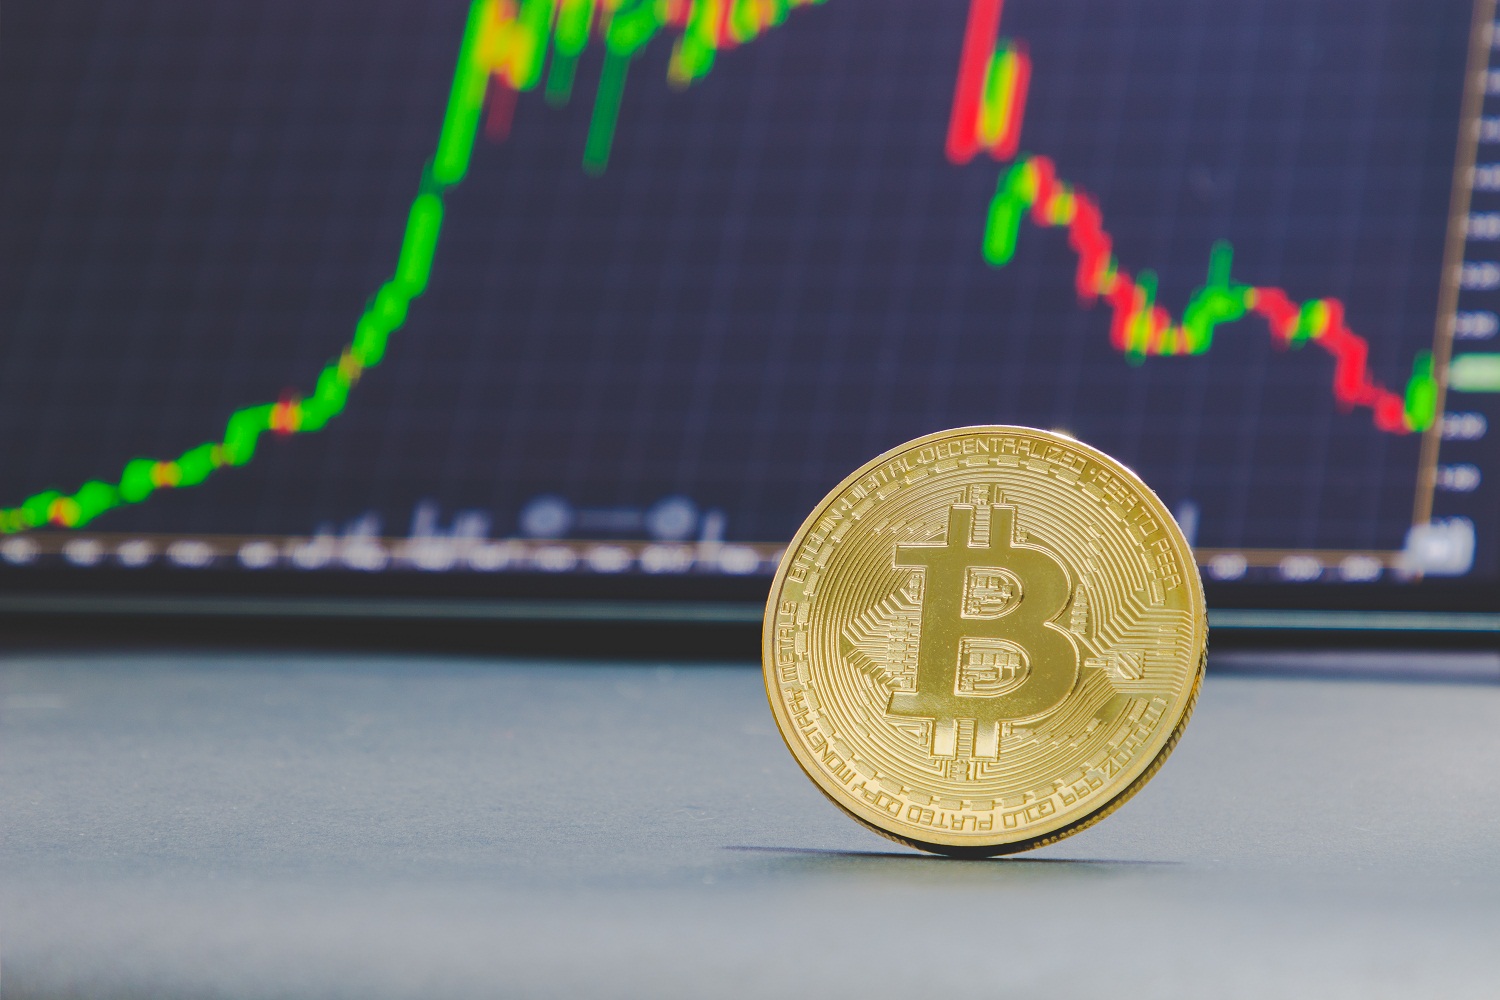 Open Bets On CME’s Bitcoin Futures Hit Record High